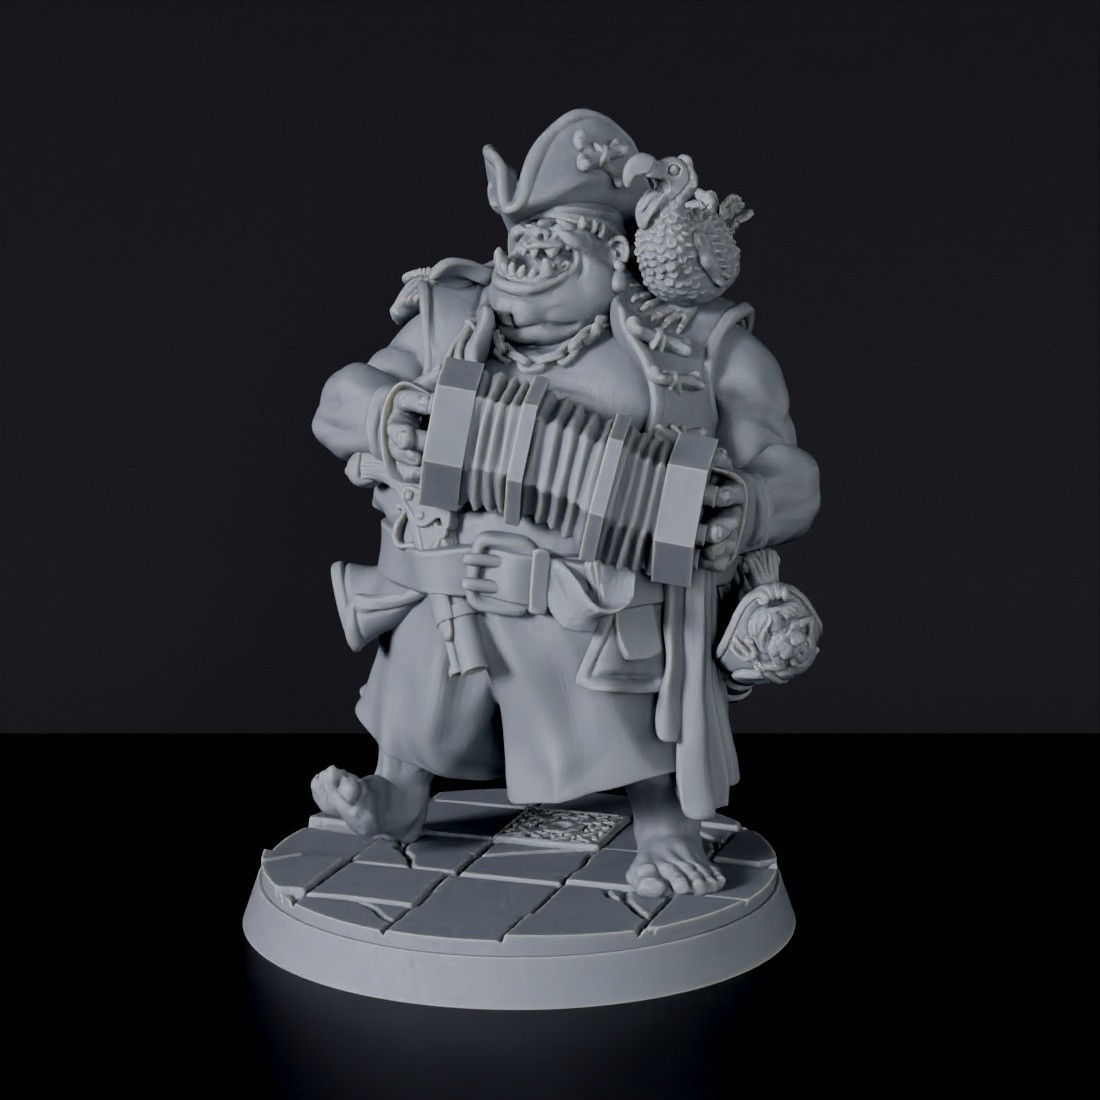 Fantasy miniatures of pirate ogre Jolly Roger with sword and hat - dedicated set to army for Bloodfields tabletop RPG game